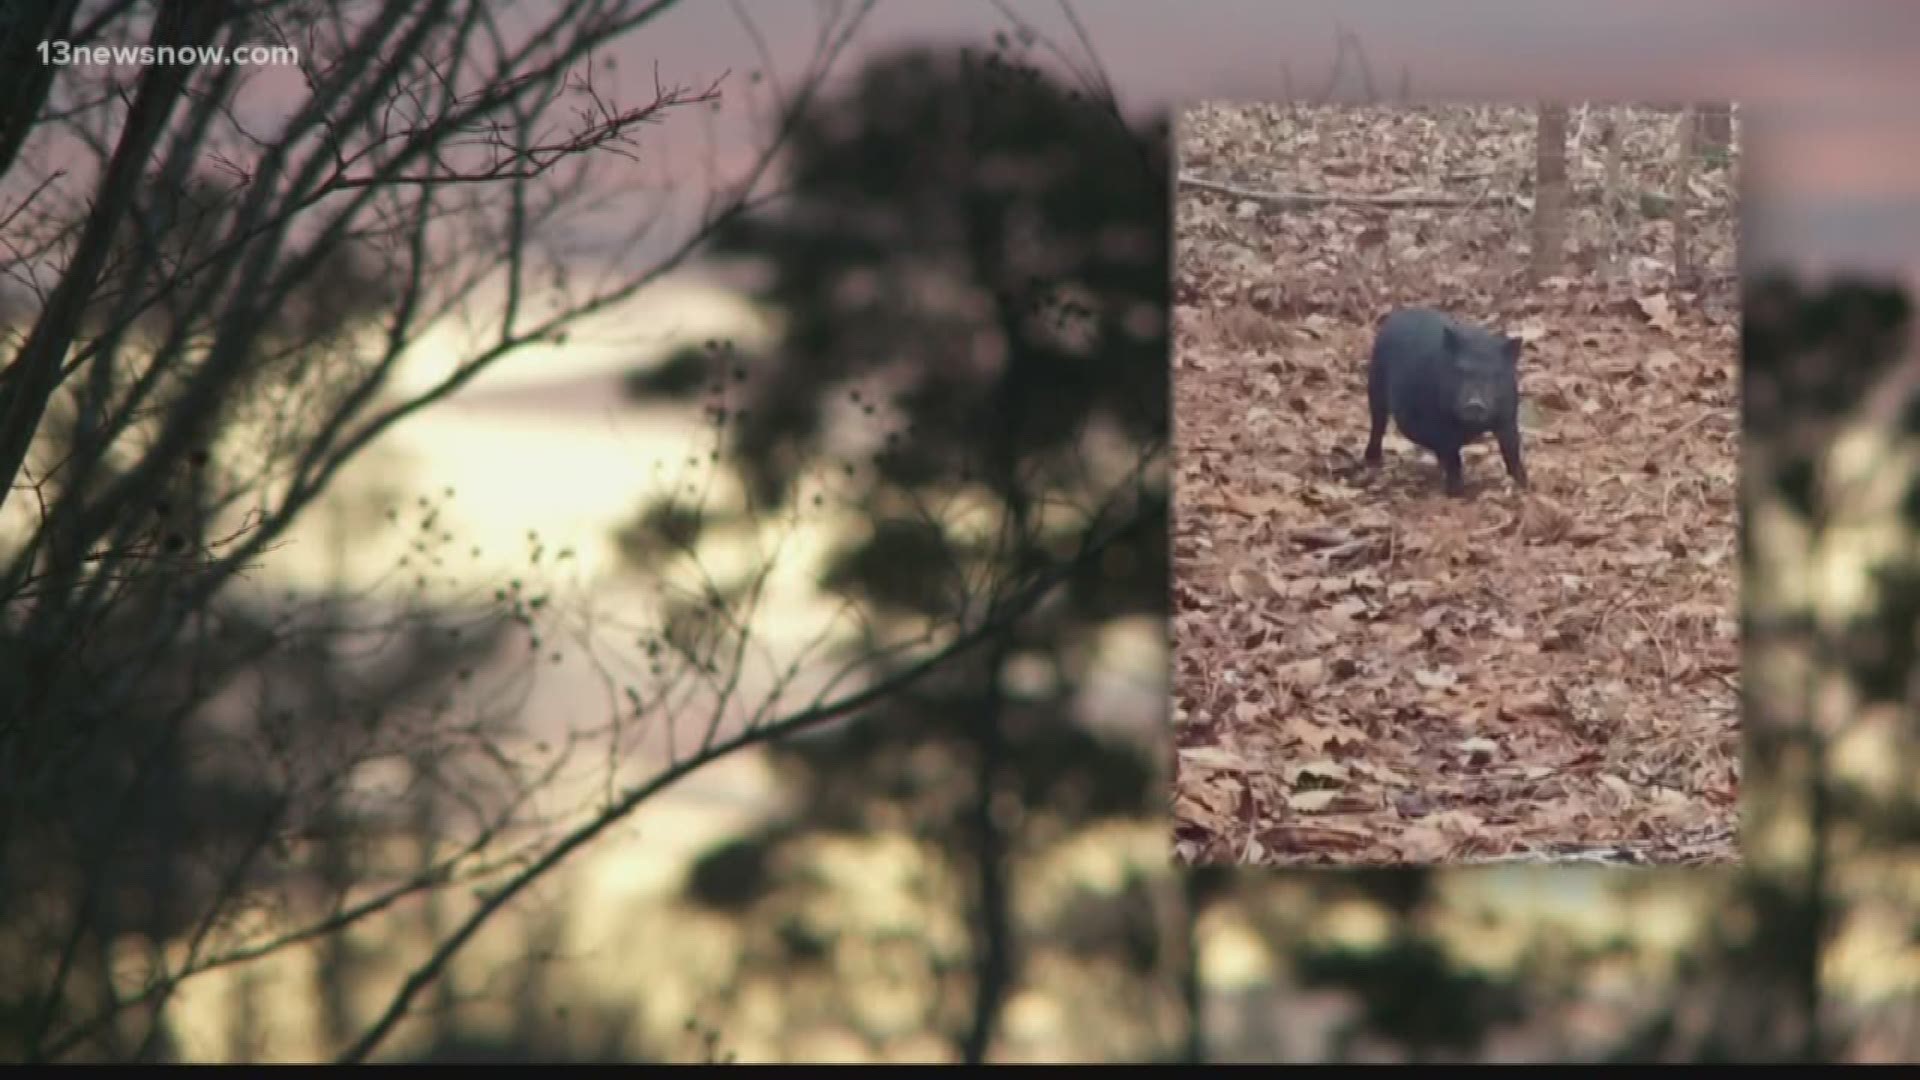 A wild pig, nicknamed Sir Bacon of Burg, was shot and killed by James City County police after they said it was a safety risk to the public.